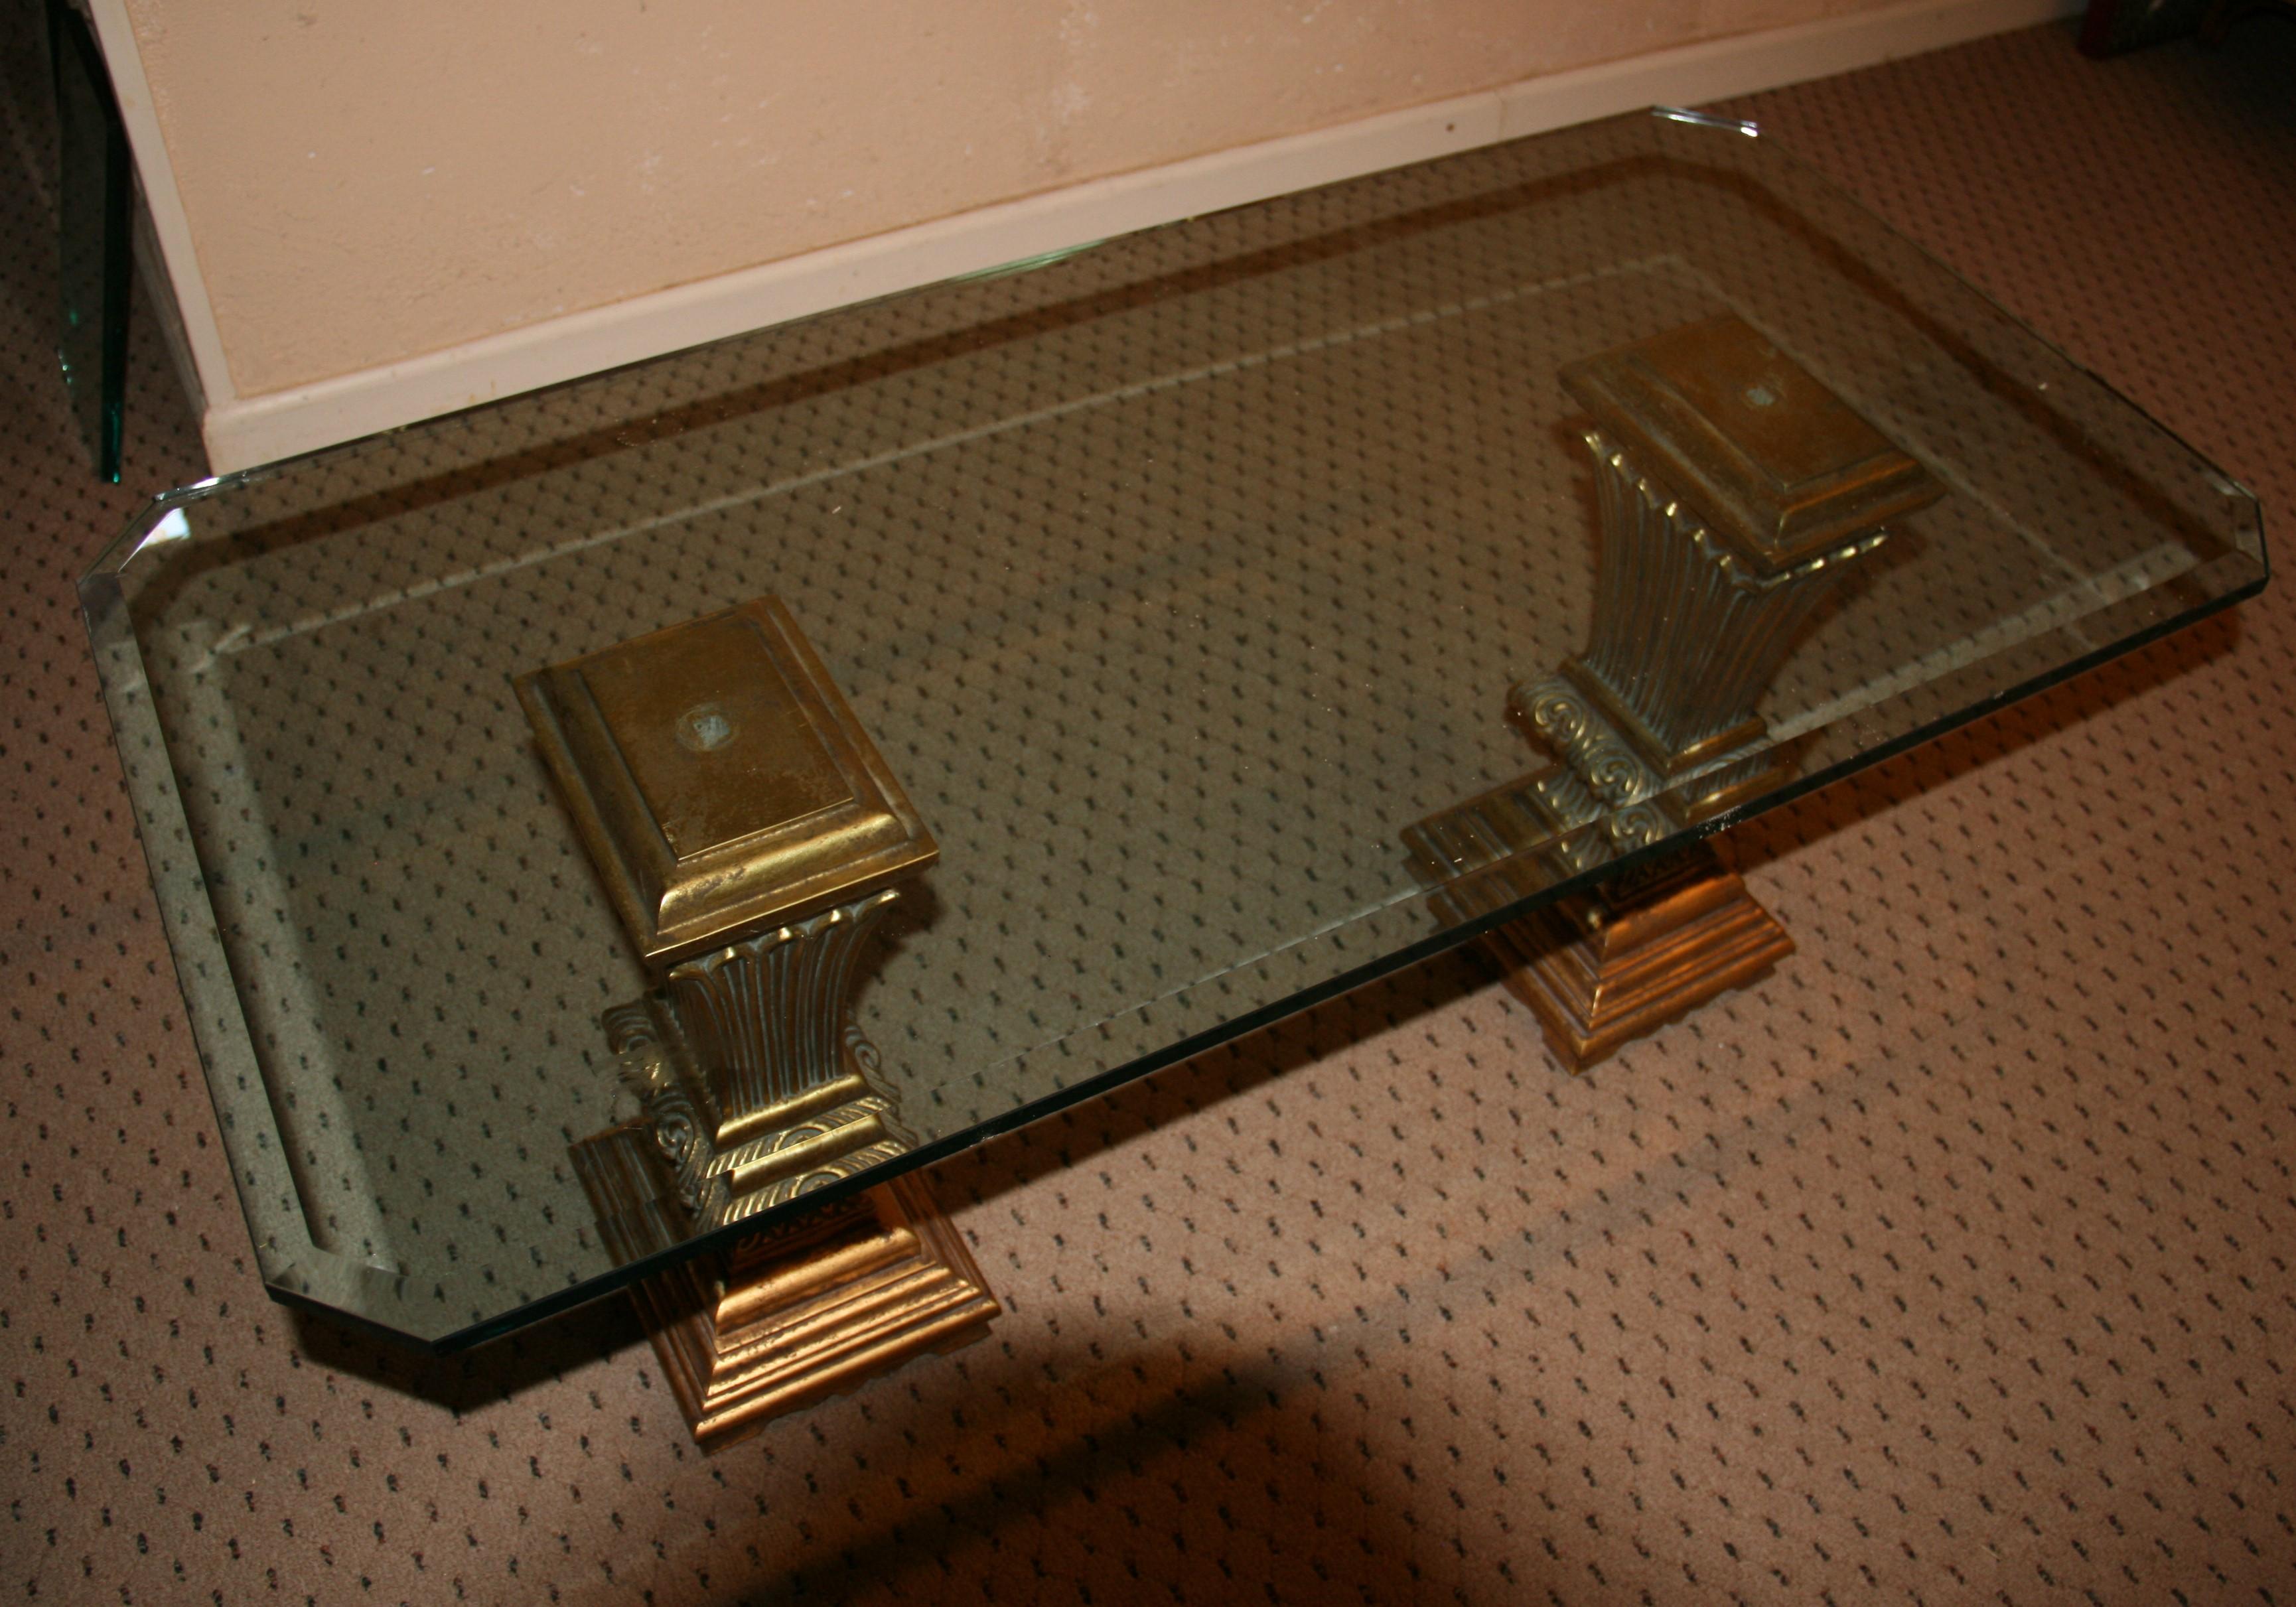 Mid-20th Century French Gilt Wood and Beveled Glass Coffee Table 1950's For Sale